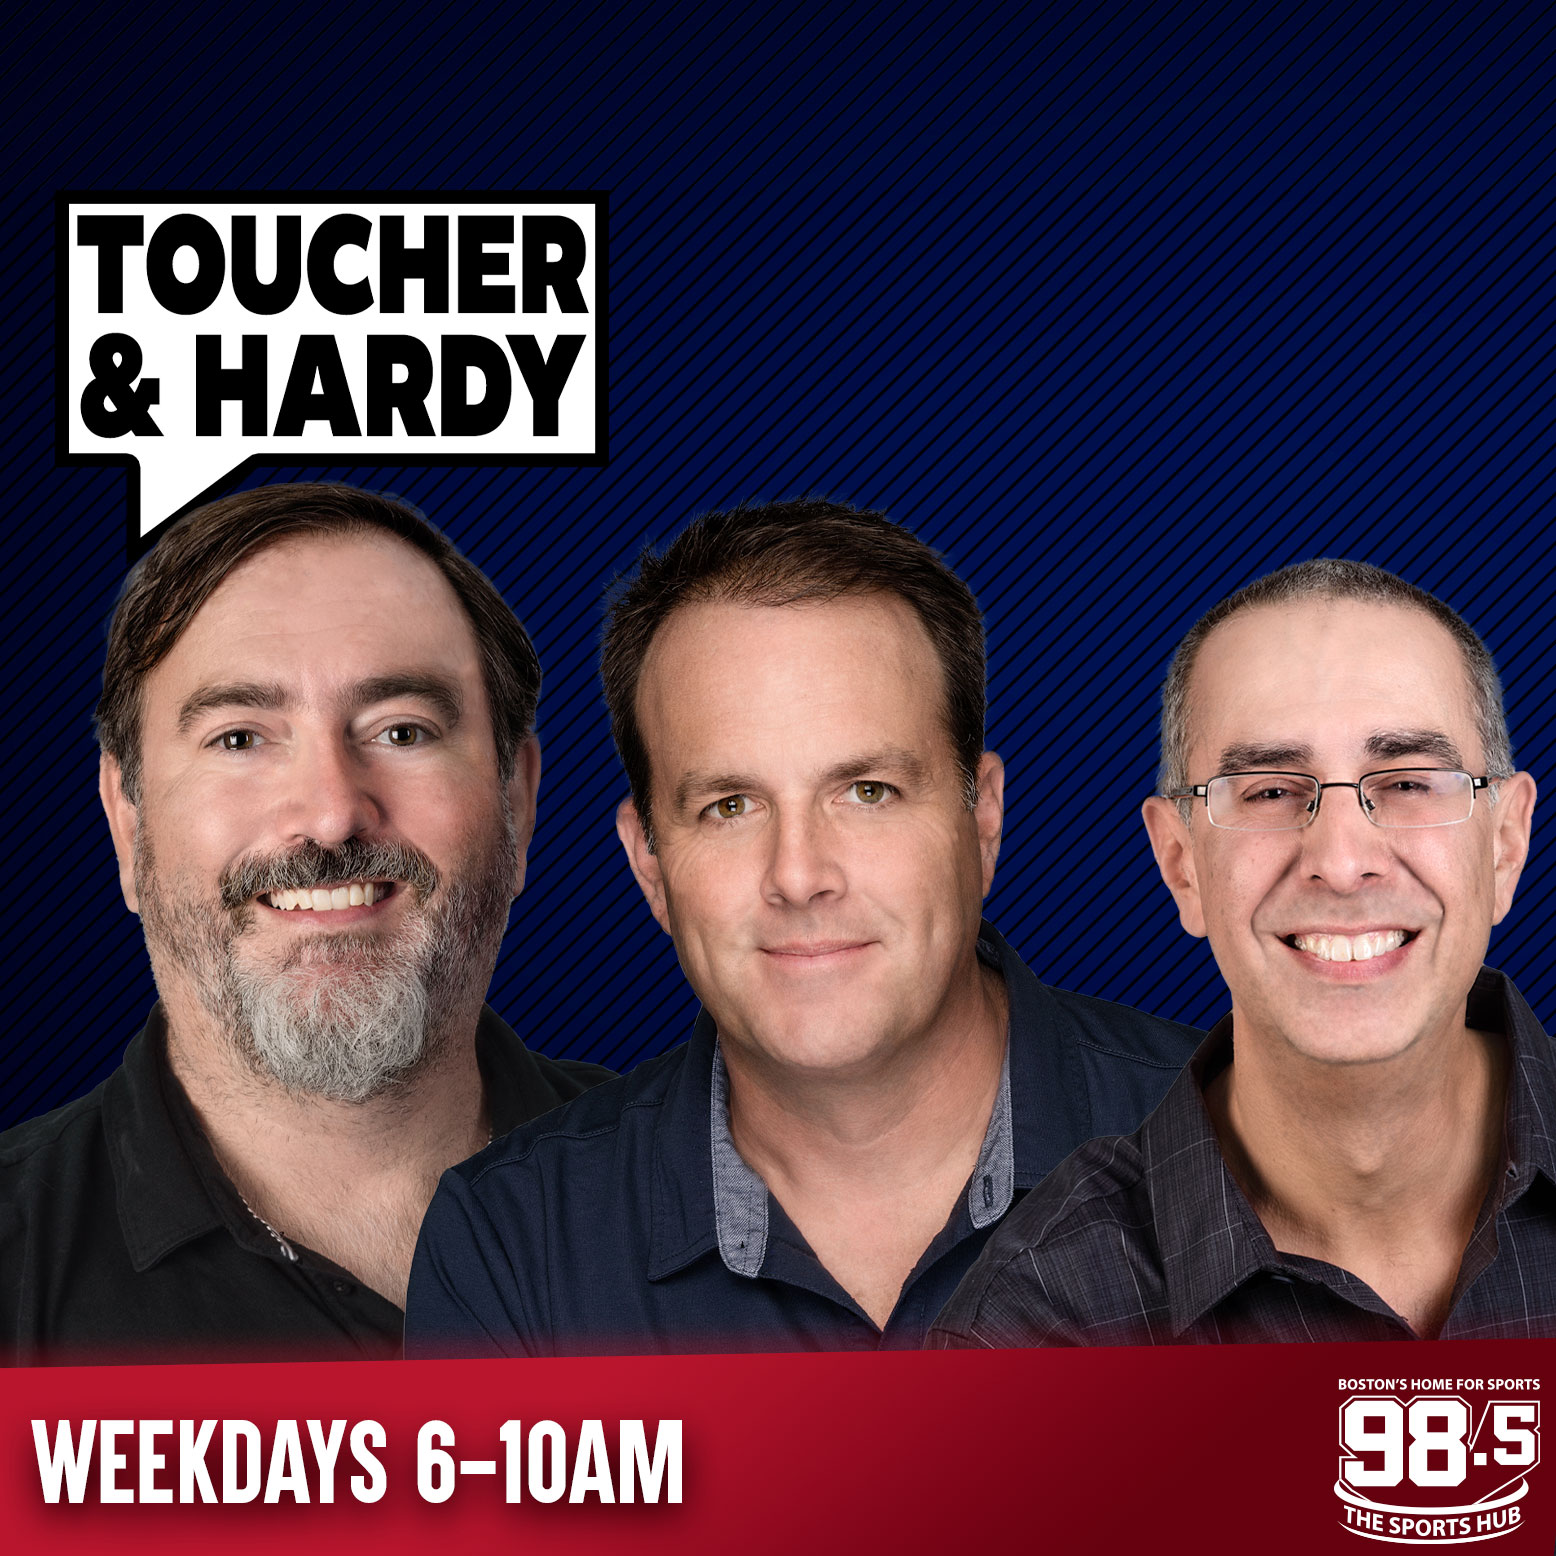 Ingrid Andress checks into rehab after national anthem debacle | Fanatics CEO Michael Rubin joins Toucher & Hardy | Big parties with rich people, yes or no? 07/17 (Hour 3)